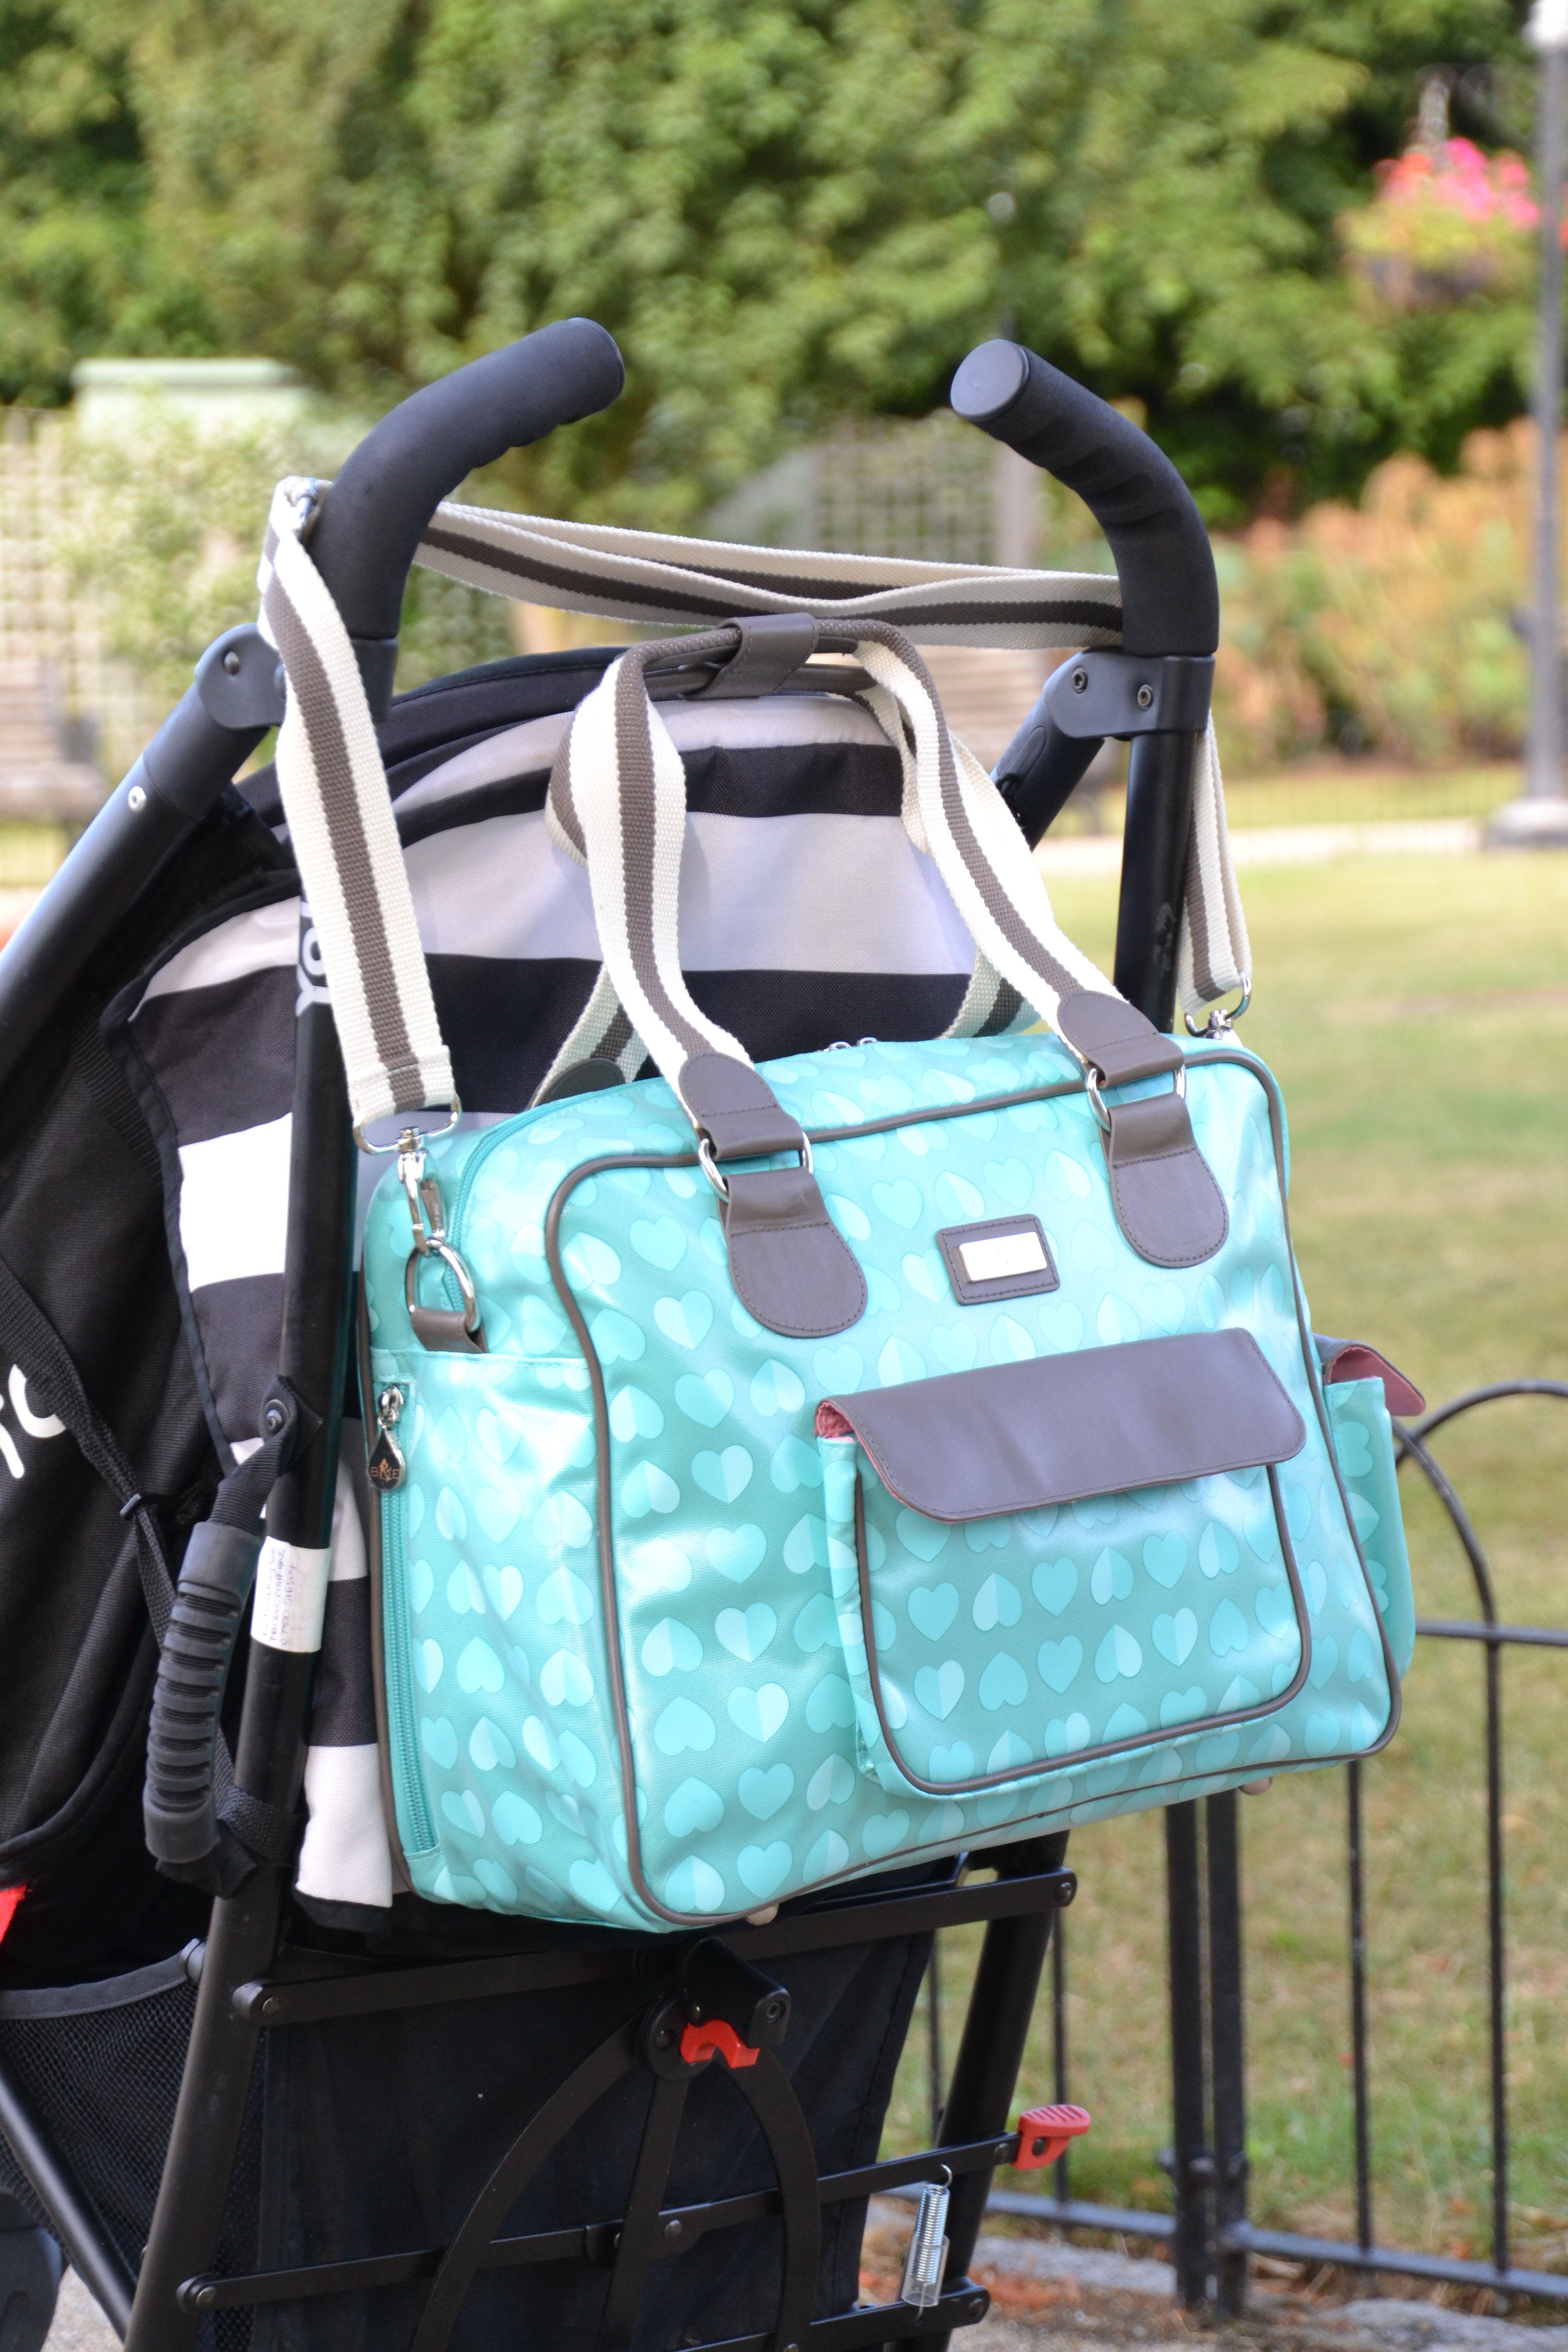 Beau and Elliot Confetti Baby Changing Bag Review